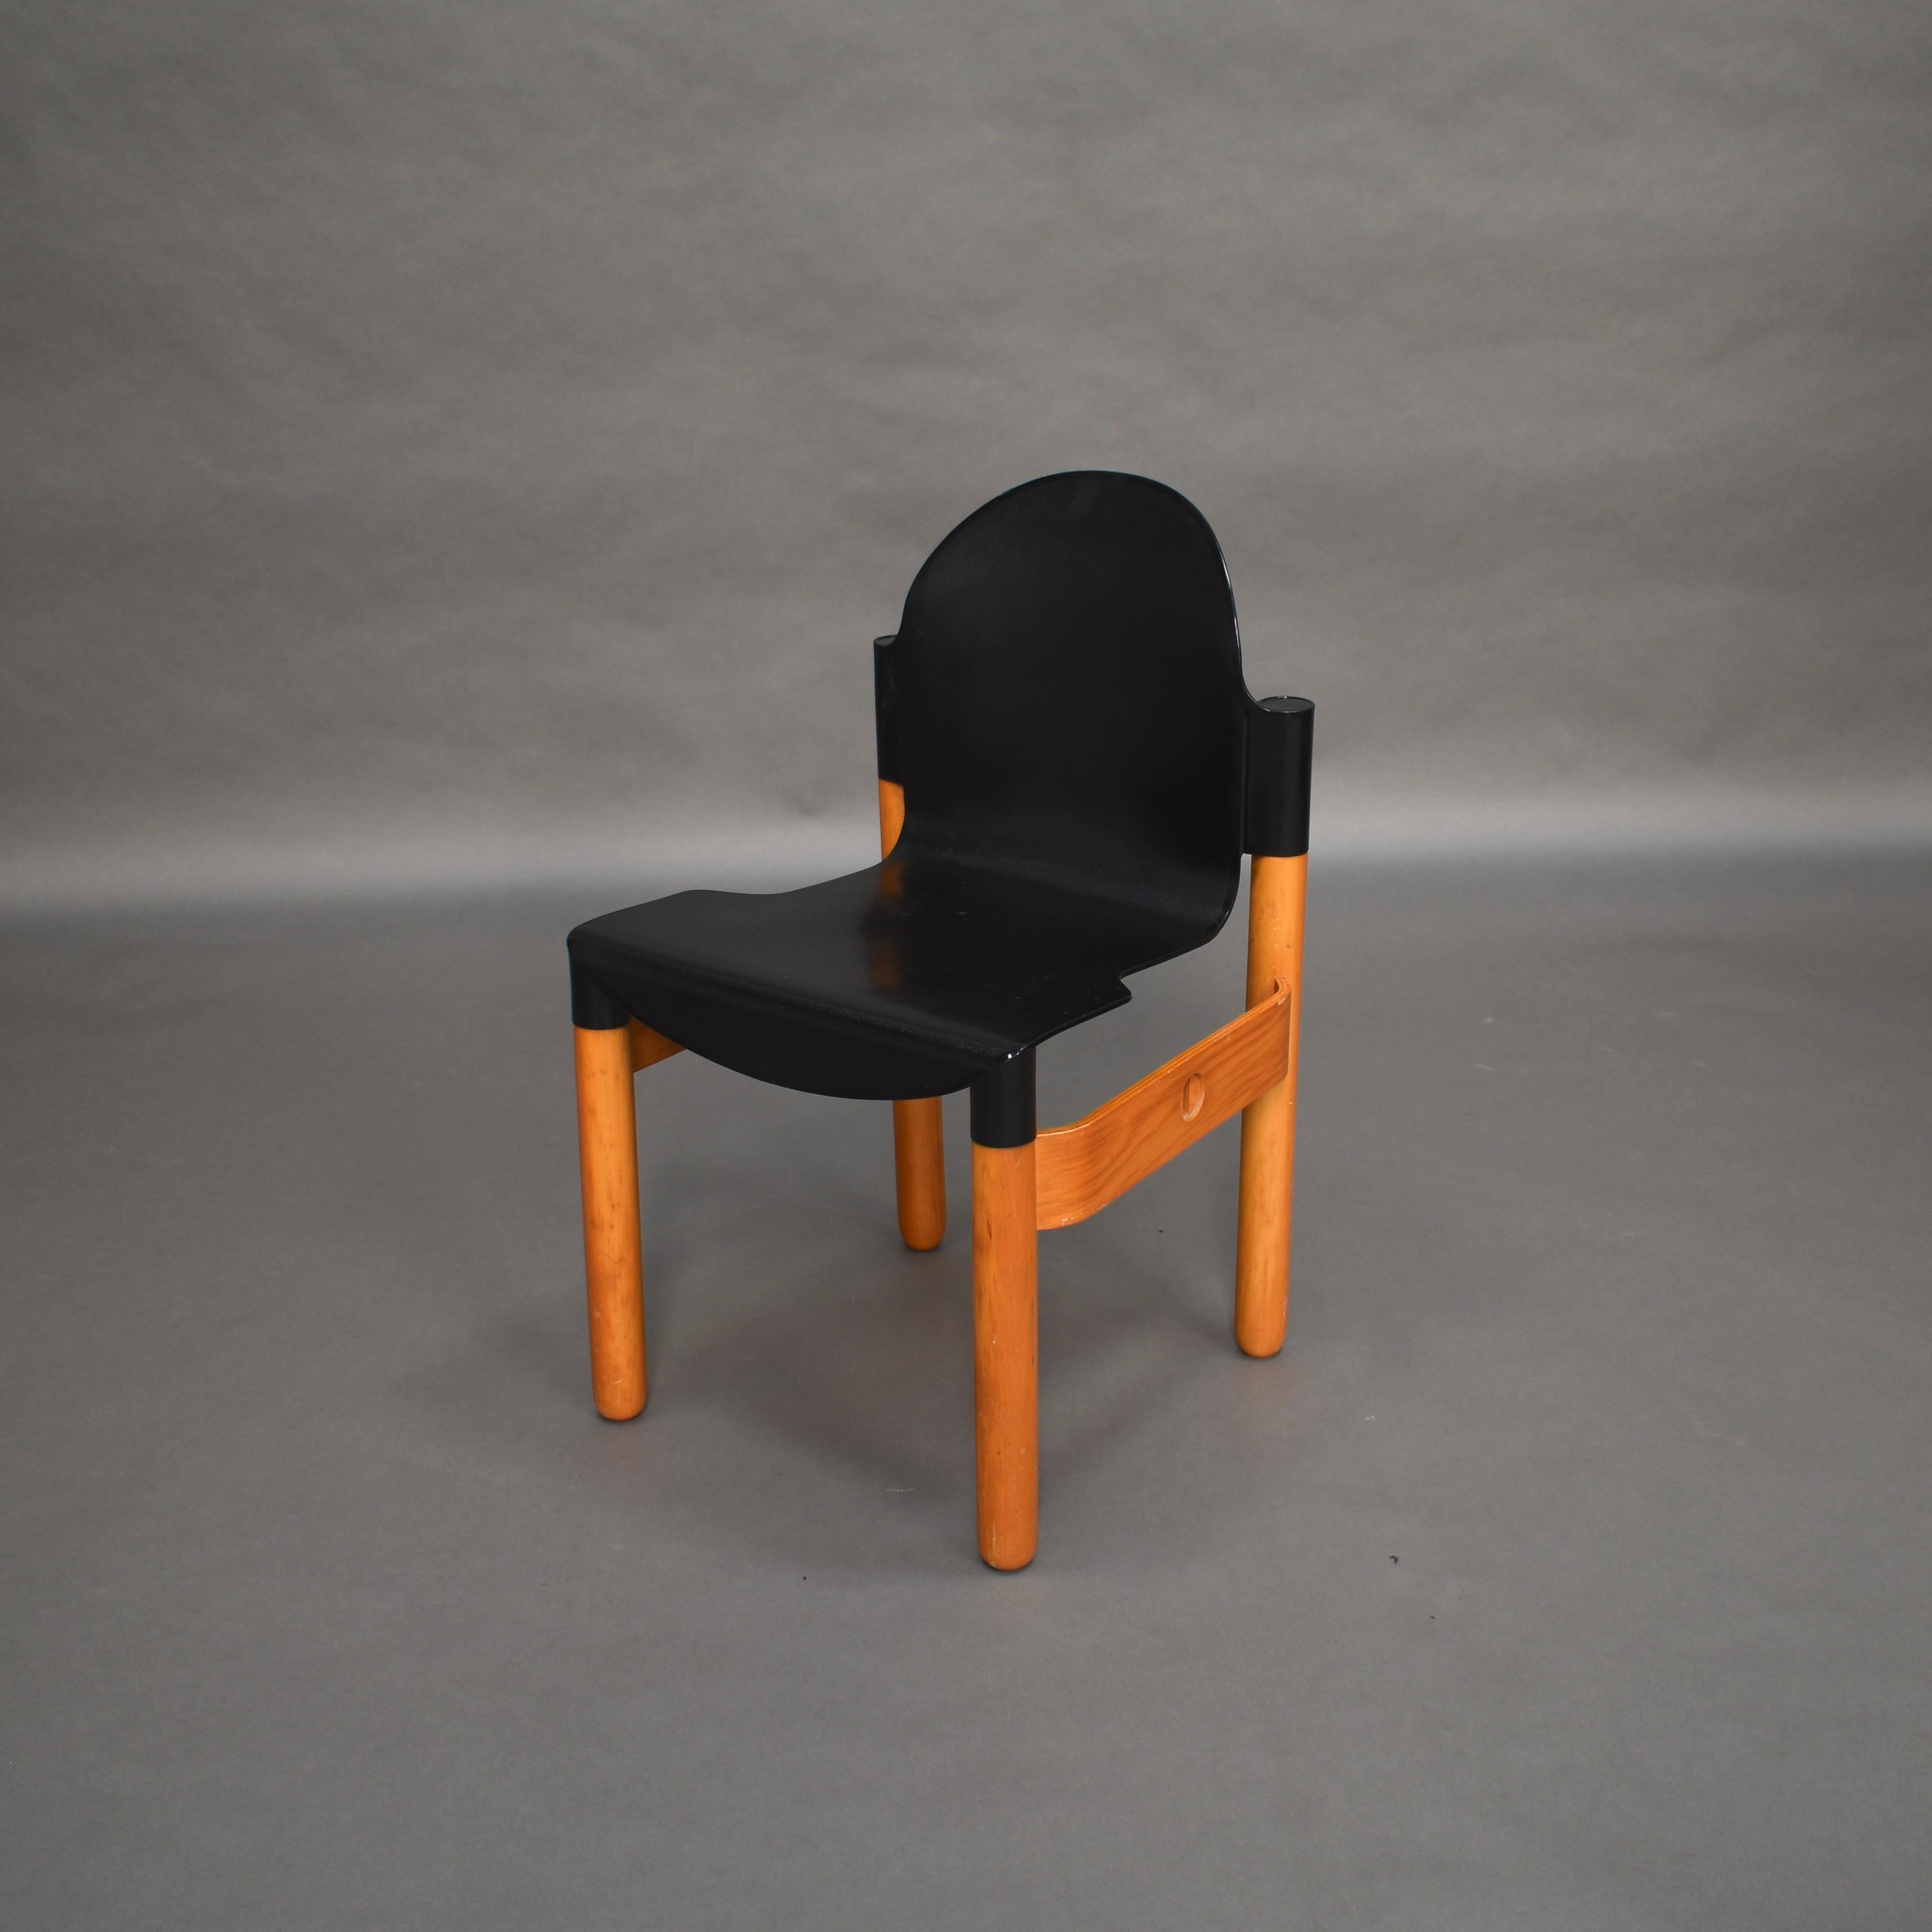 Late 20th Century Thonet Chair in Birch and Plastic by Gerd Lange, West-Germany, 1973 For Sale